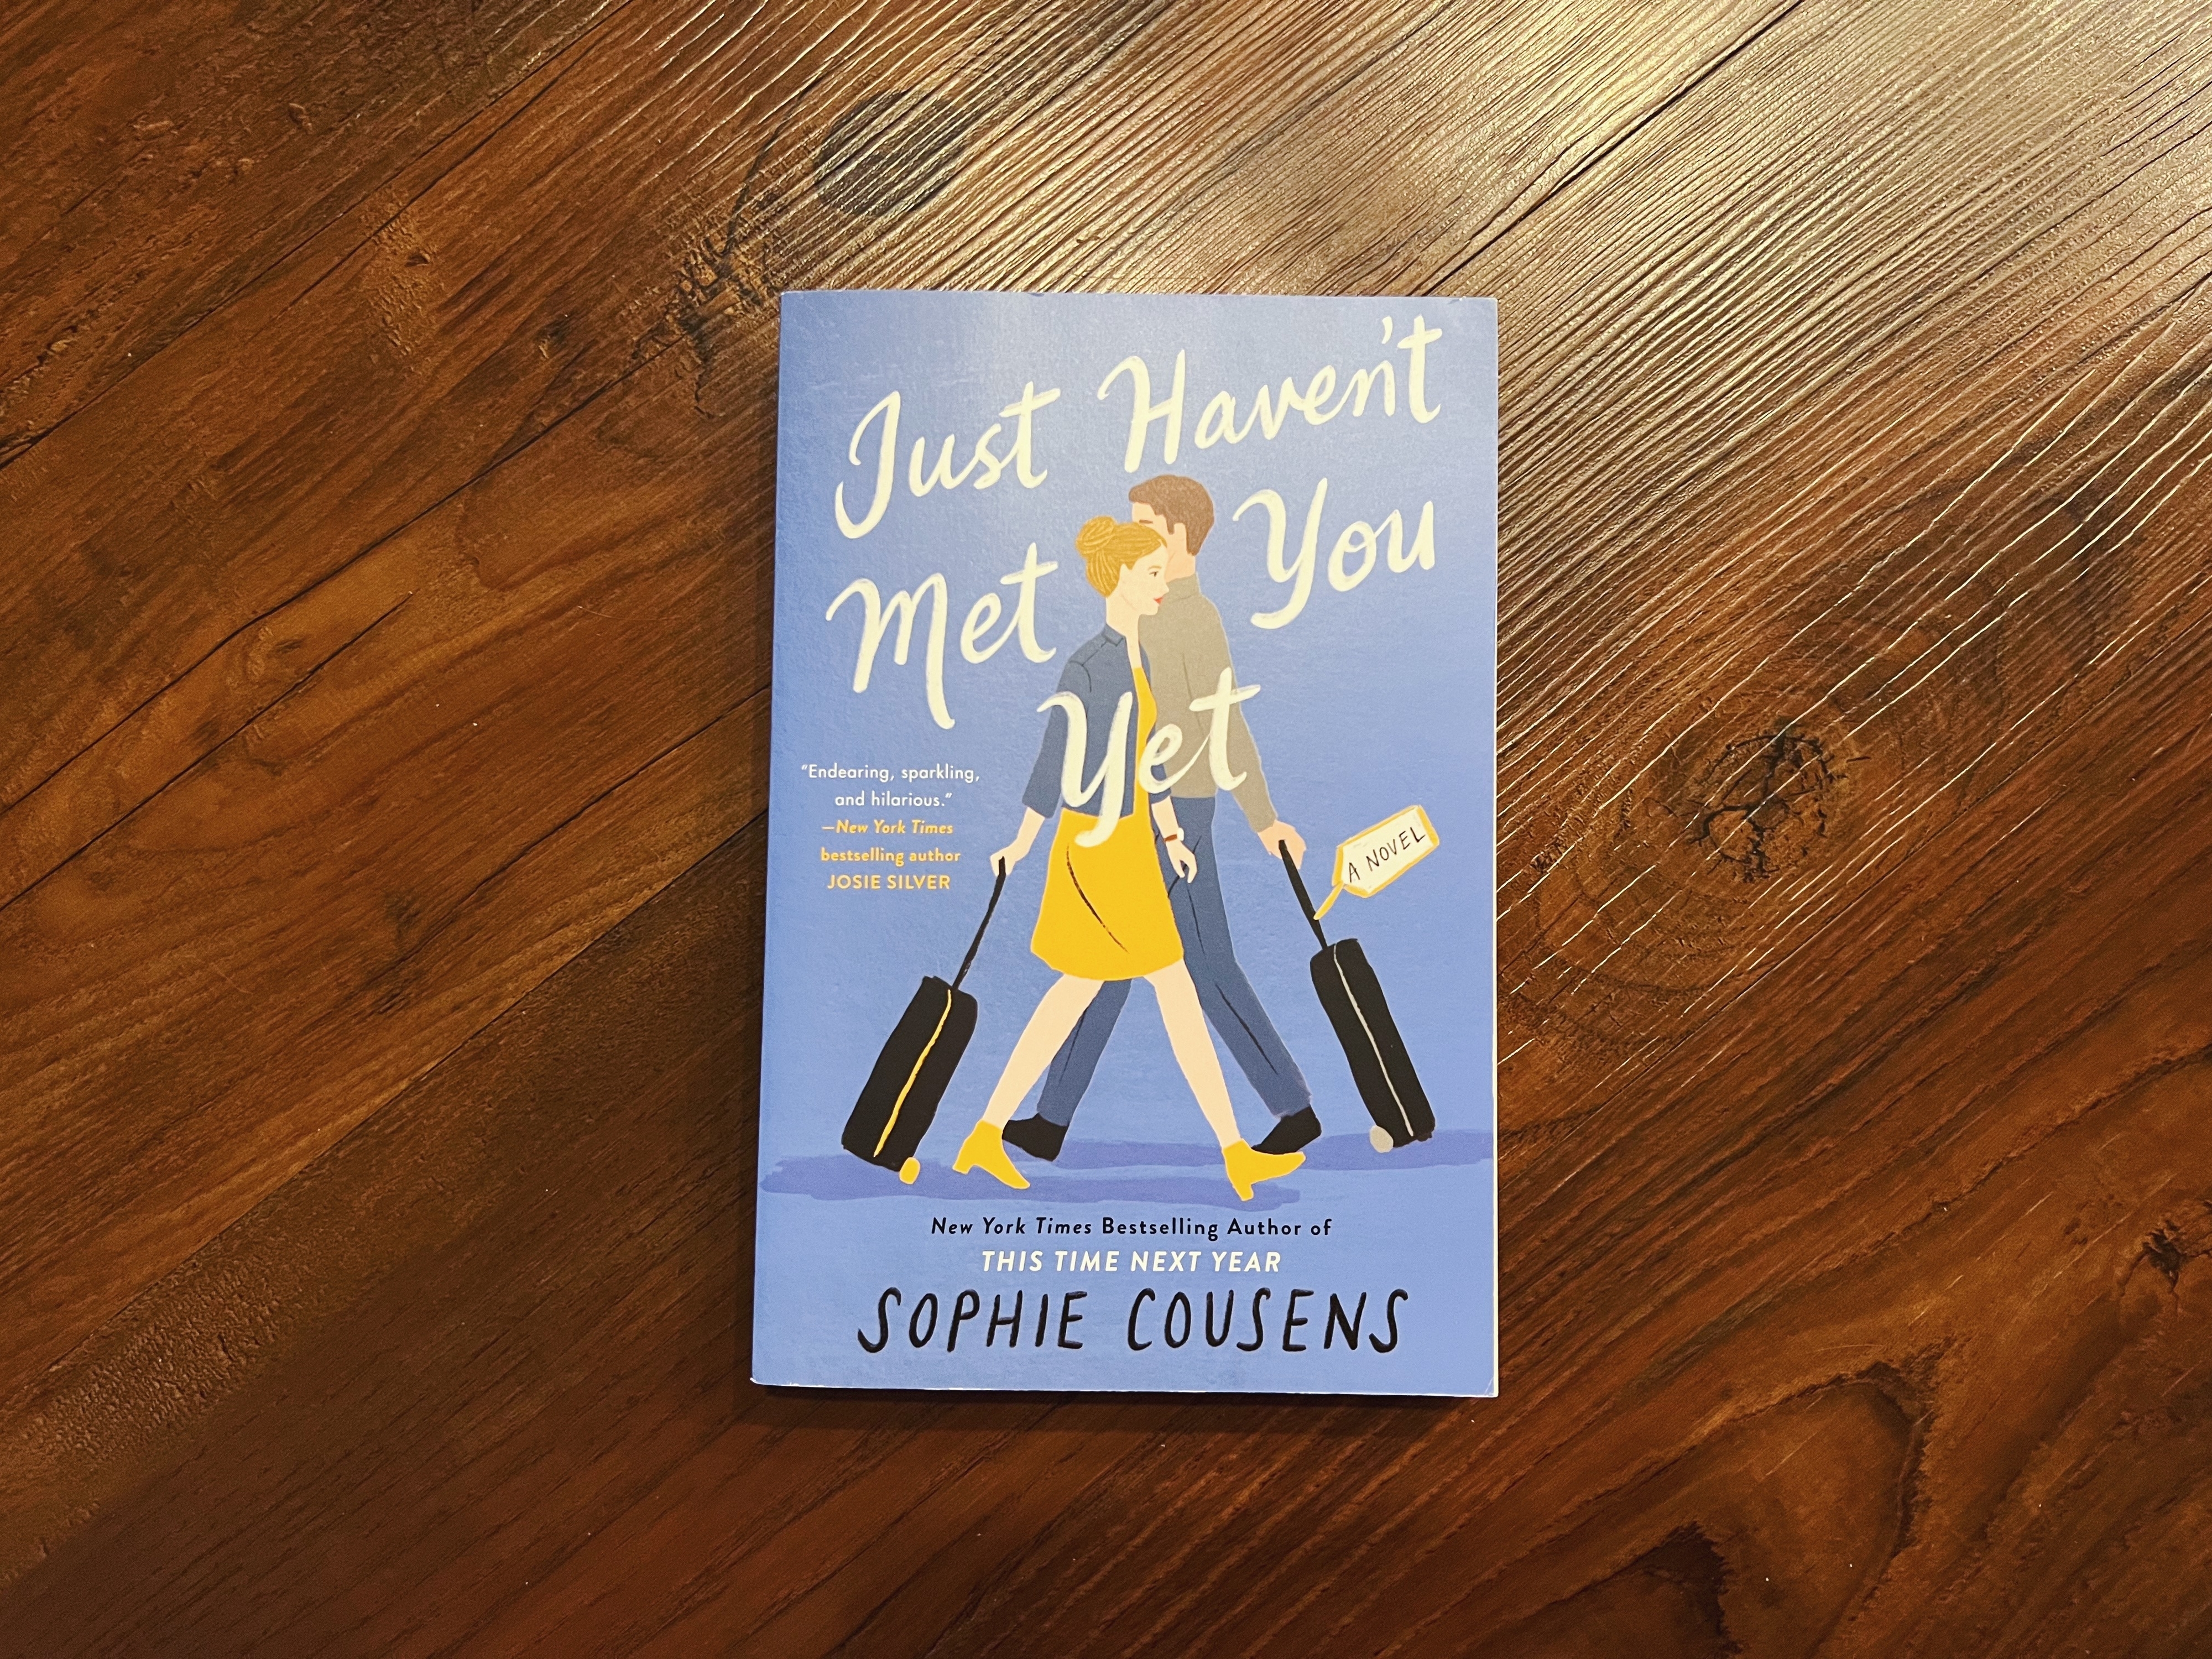 Book cover of &quot;Just Haven&#x27;t Met You Yet&quot; by Sophie Cousens, featuring illustrated woman walking with luggage